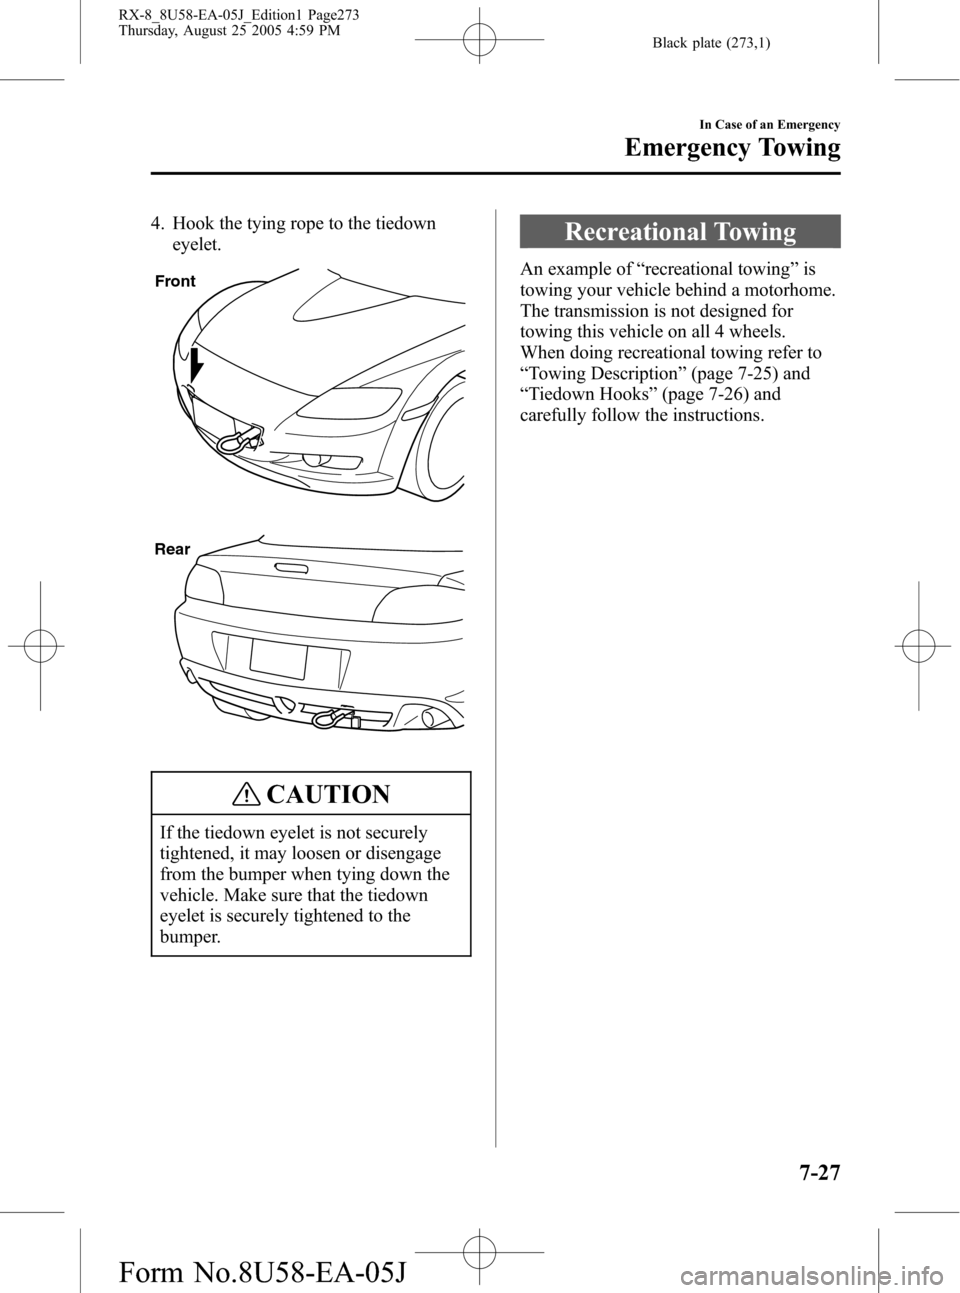 MAZDA MODEL RX 8 2006  Owners Manual (in English) Black plate (273,1)
4. Hook the tying rope to the tiedown
eyelet.
Front
Rear
CAUTION
If the tiedown eyelet is not securely
tightened, it may loosen or disengage
from the bumper when tying down the
veh